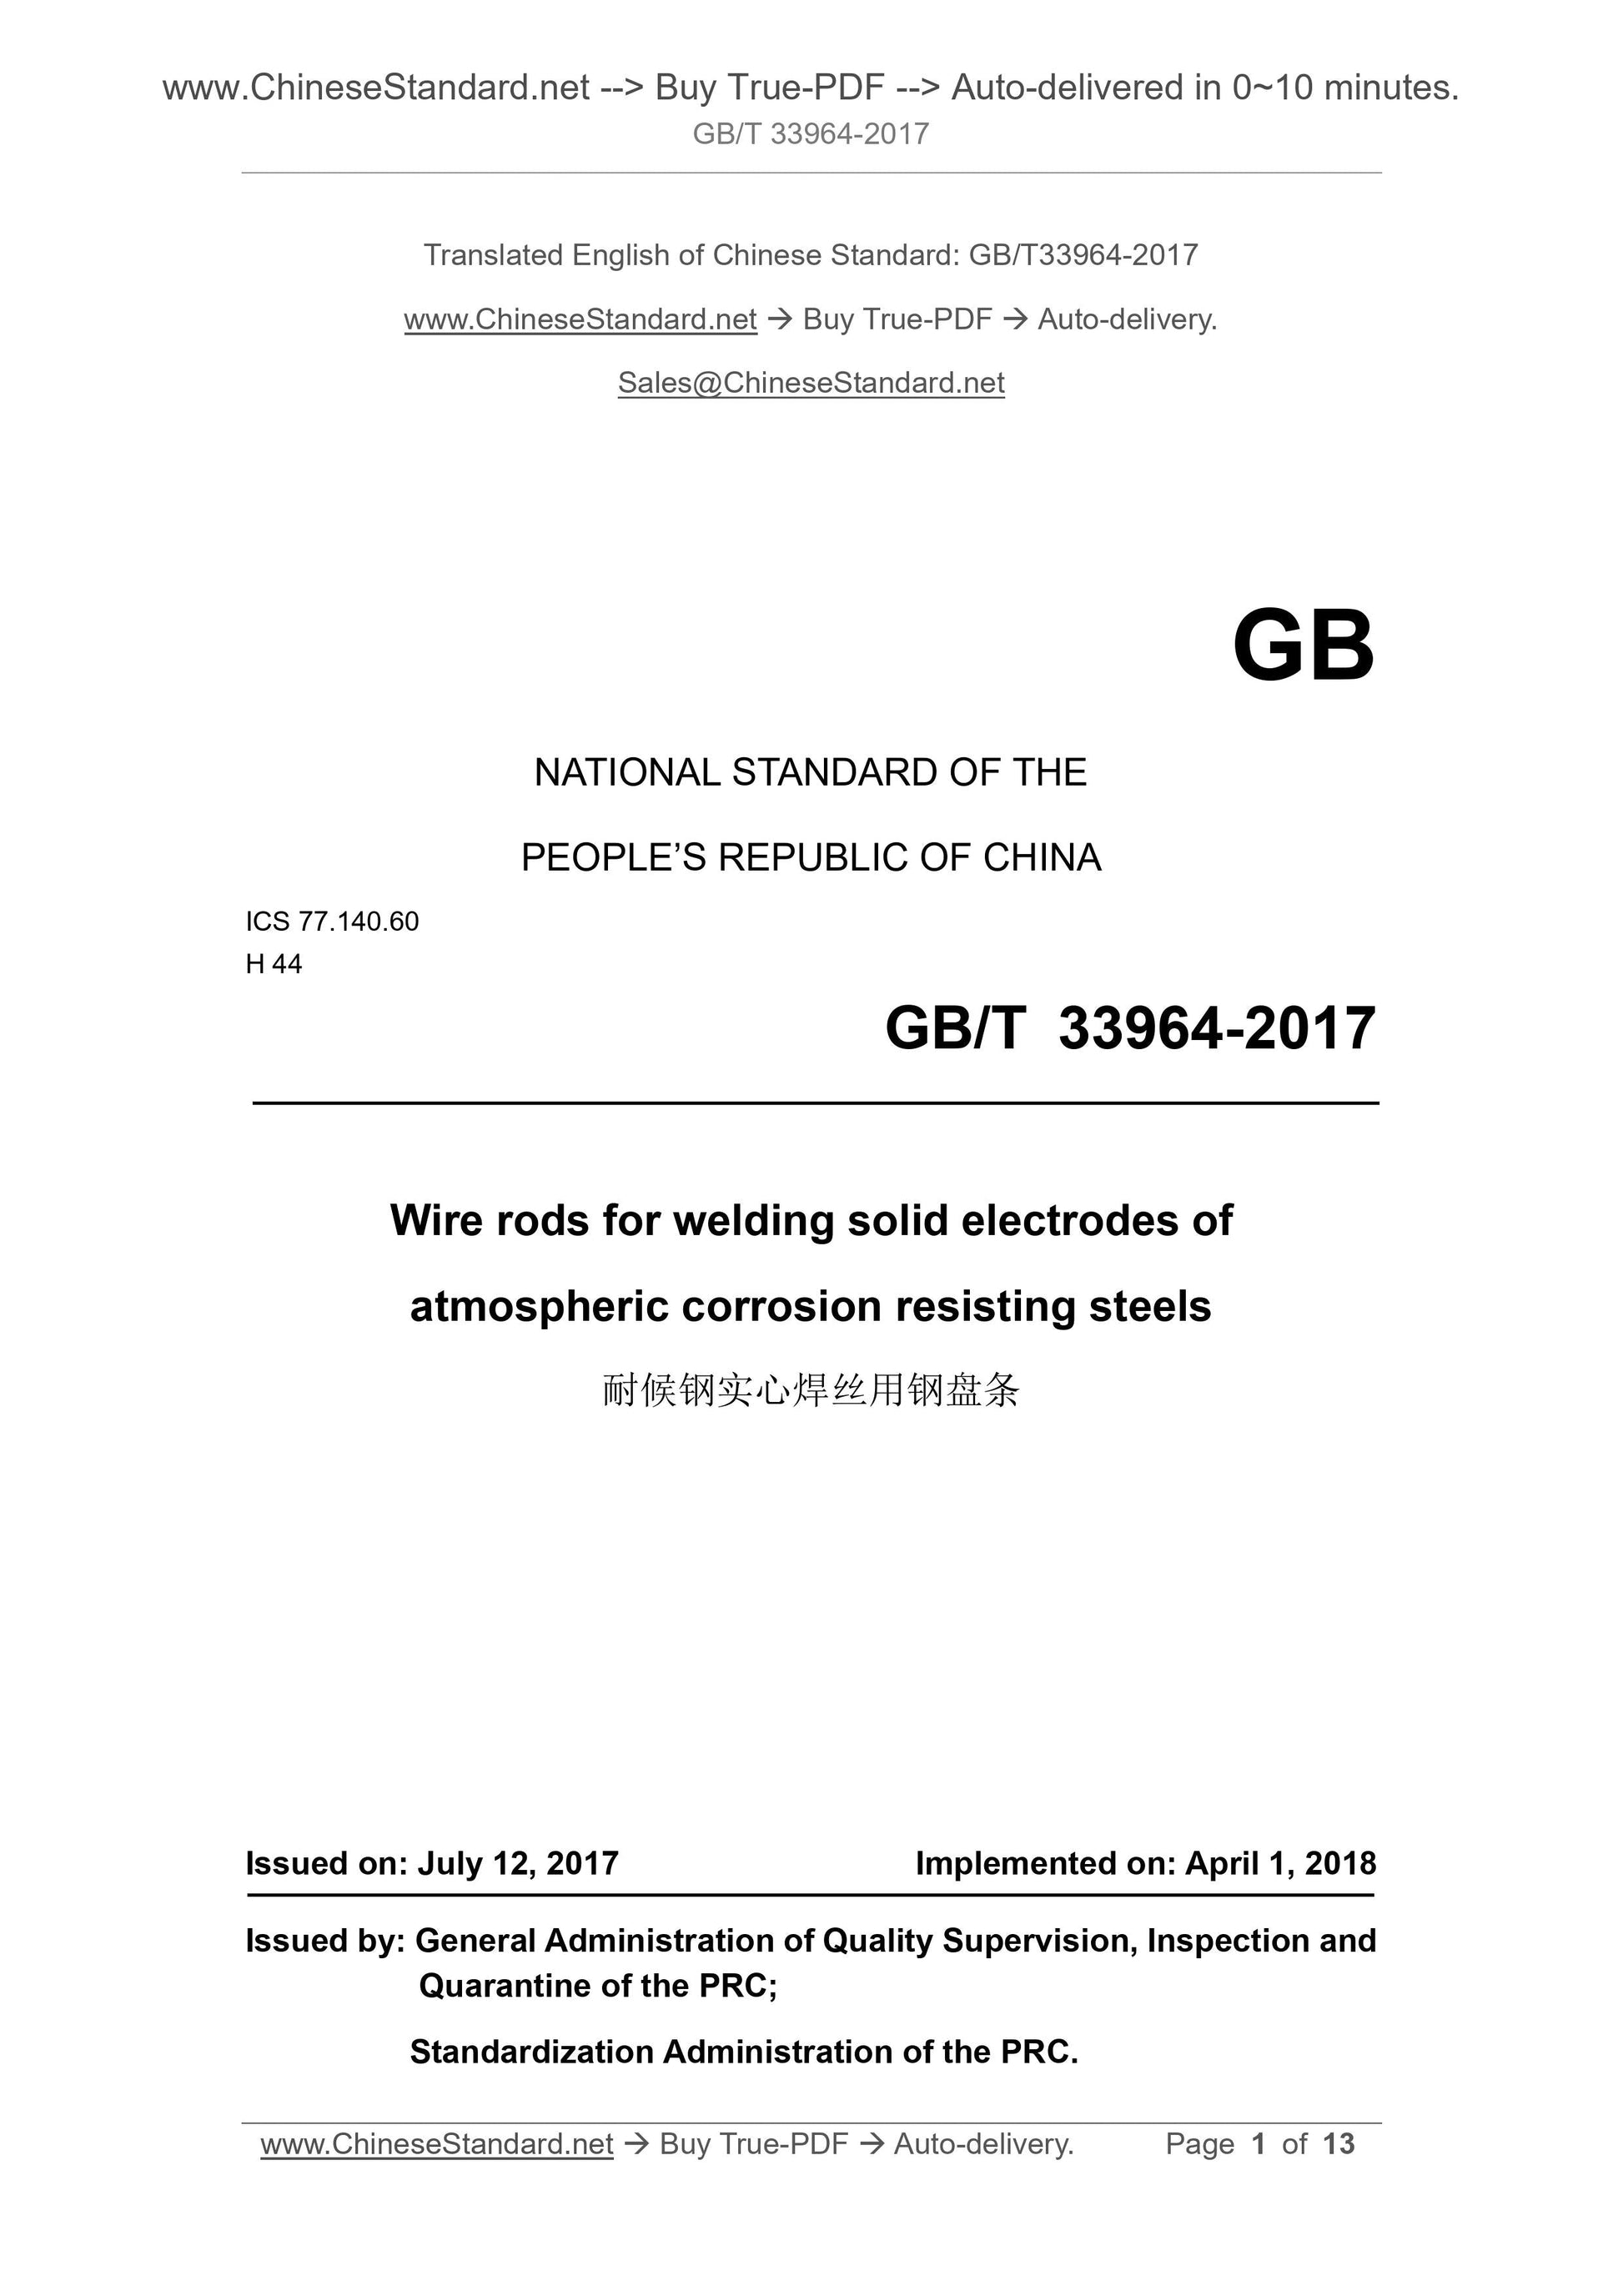 GB/T 33964-2017 Page 1